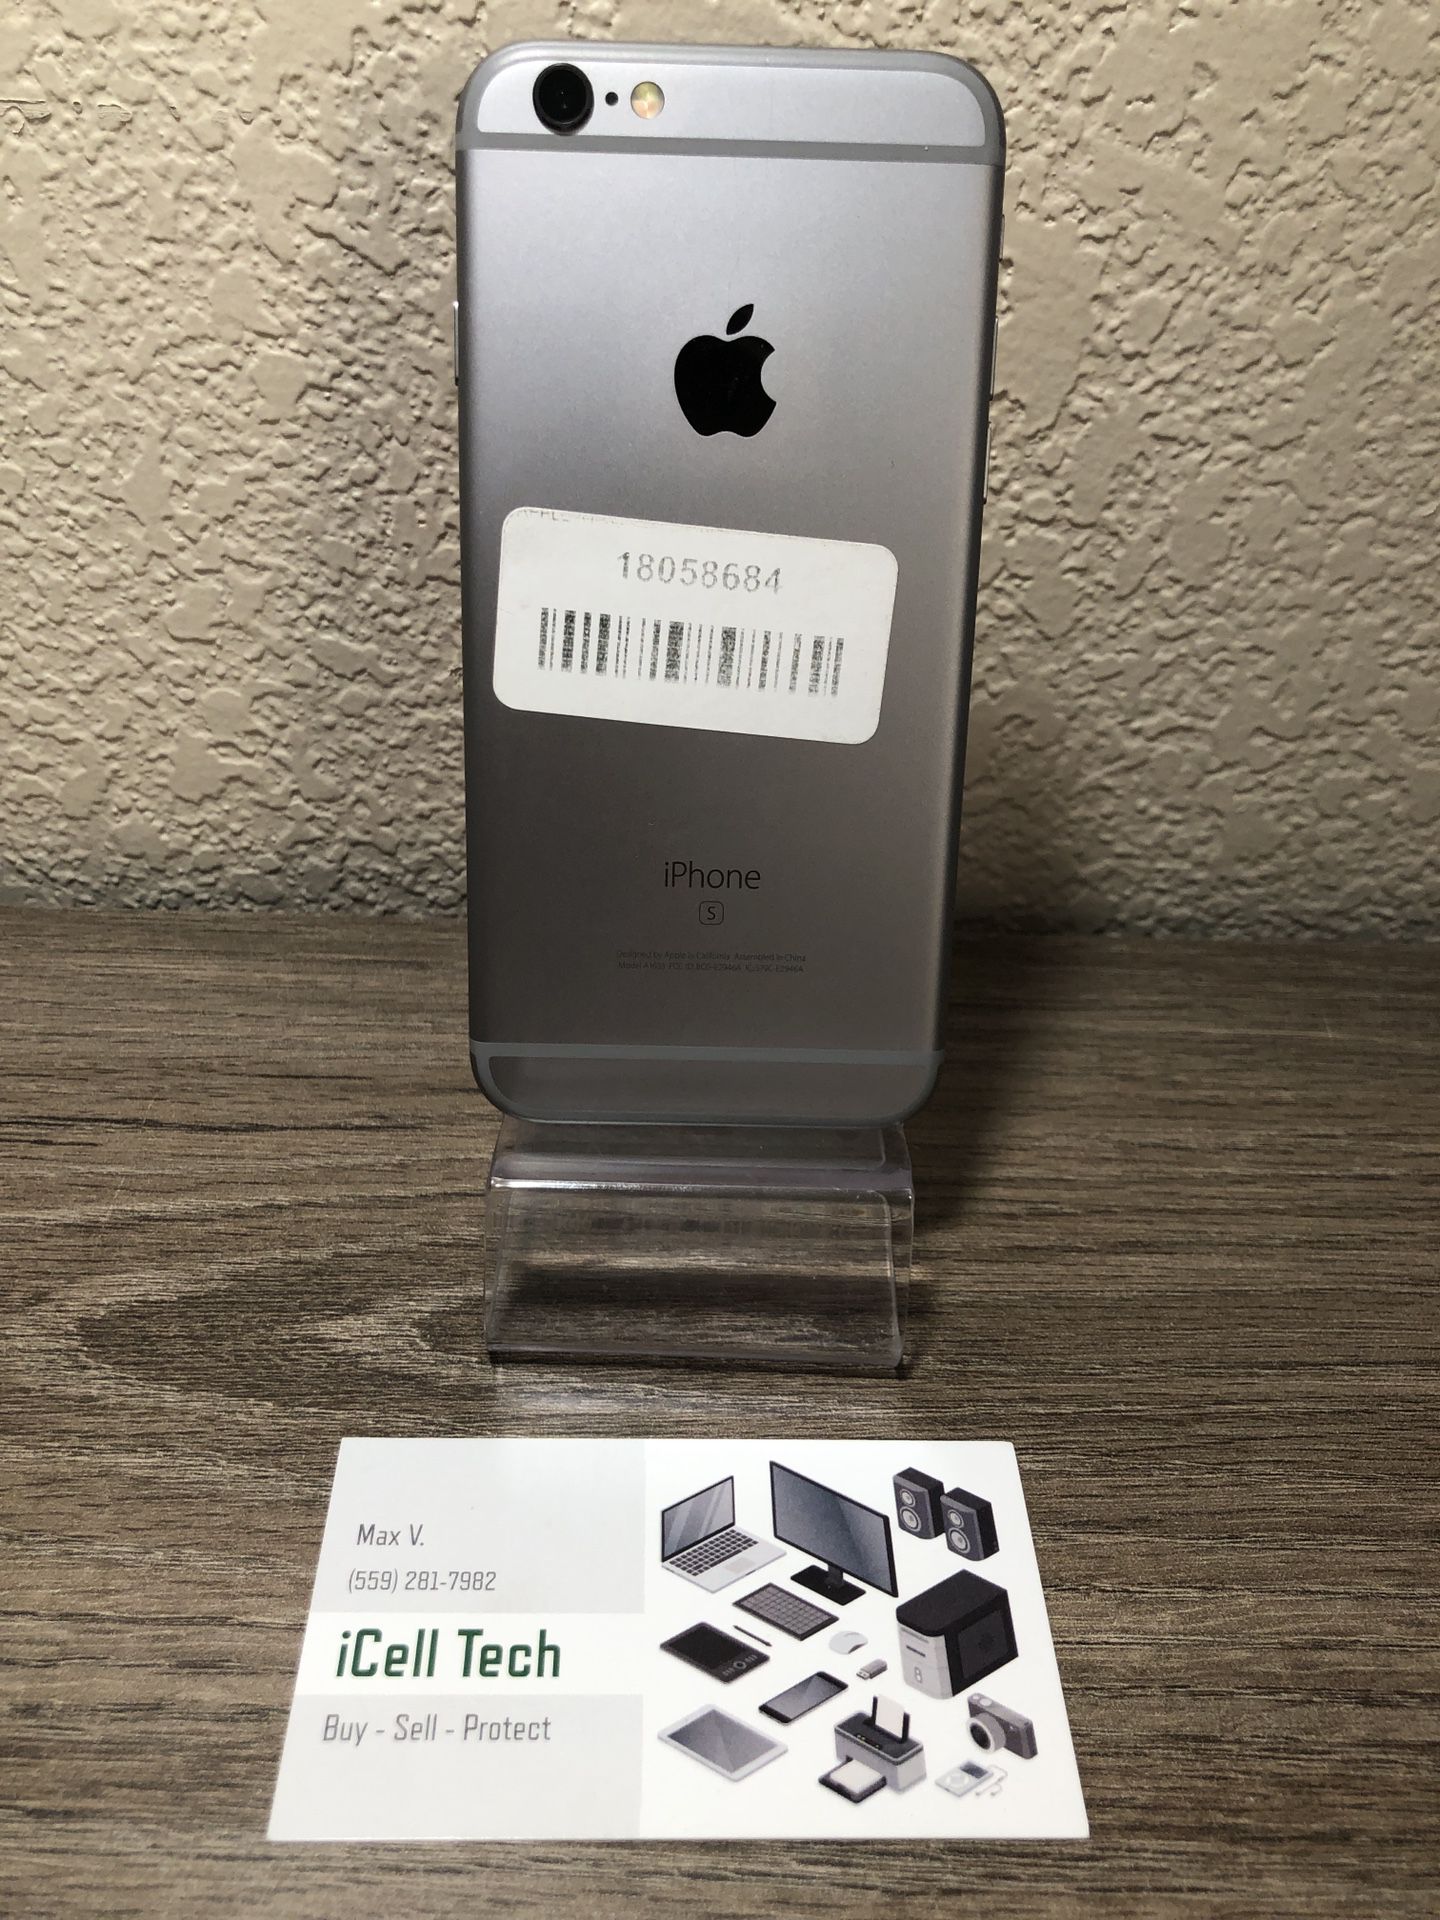 iPhone 6s 64gb At&t and Cricket Carrier. IMEI clean, iCloud unlocked.